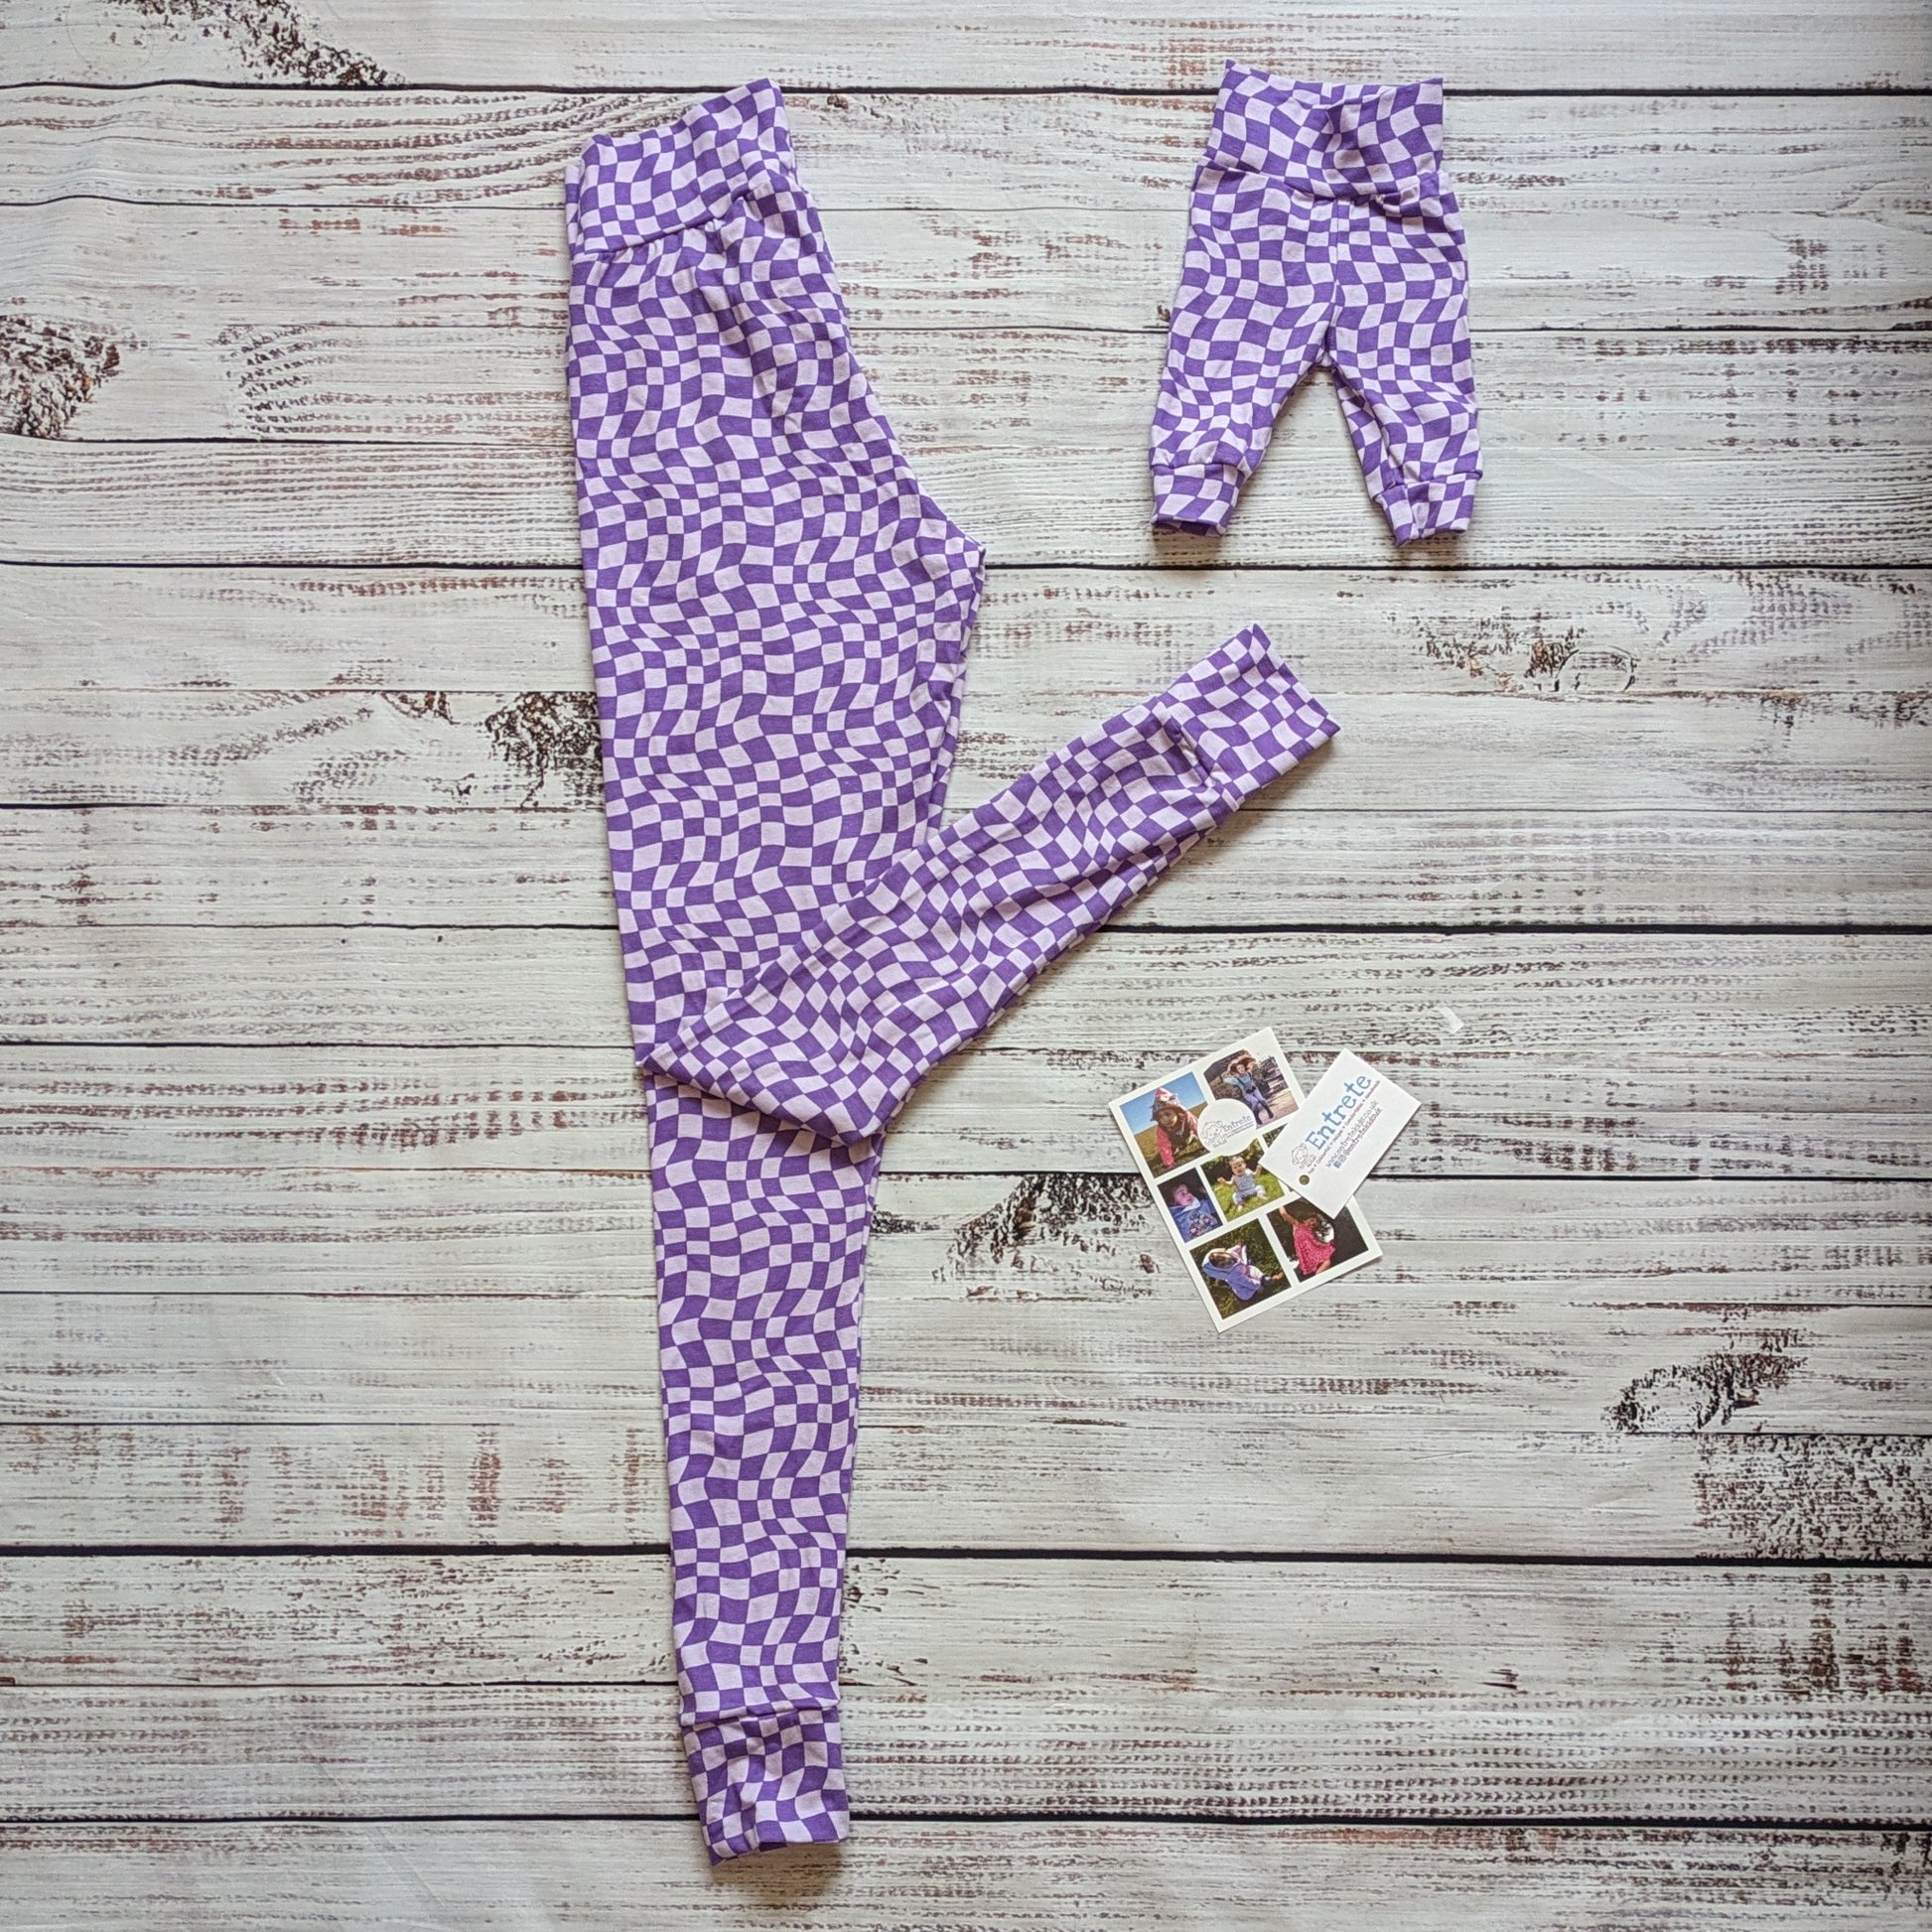 Vibrant purple trippy checked leggings. Handmade in soft and stretchy cotton jersey.